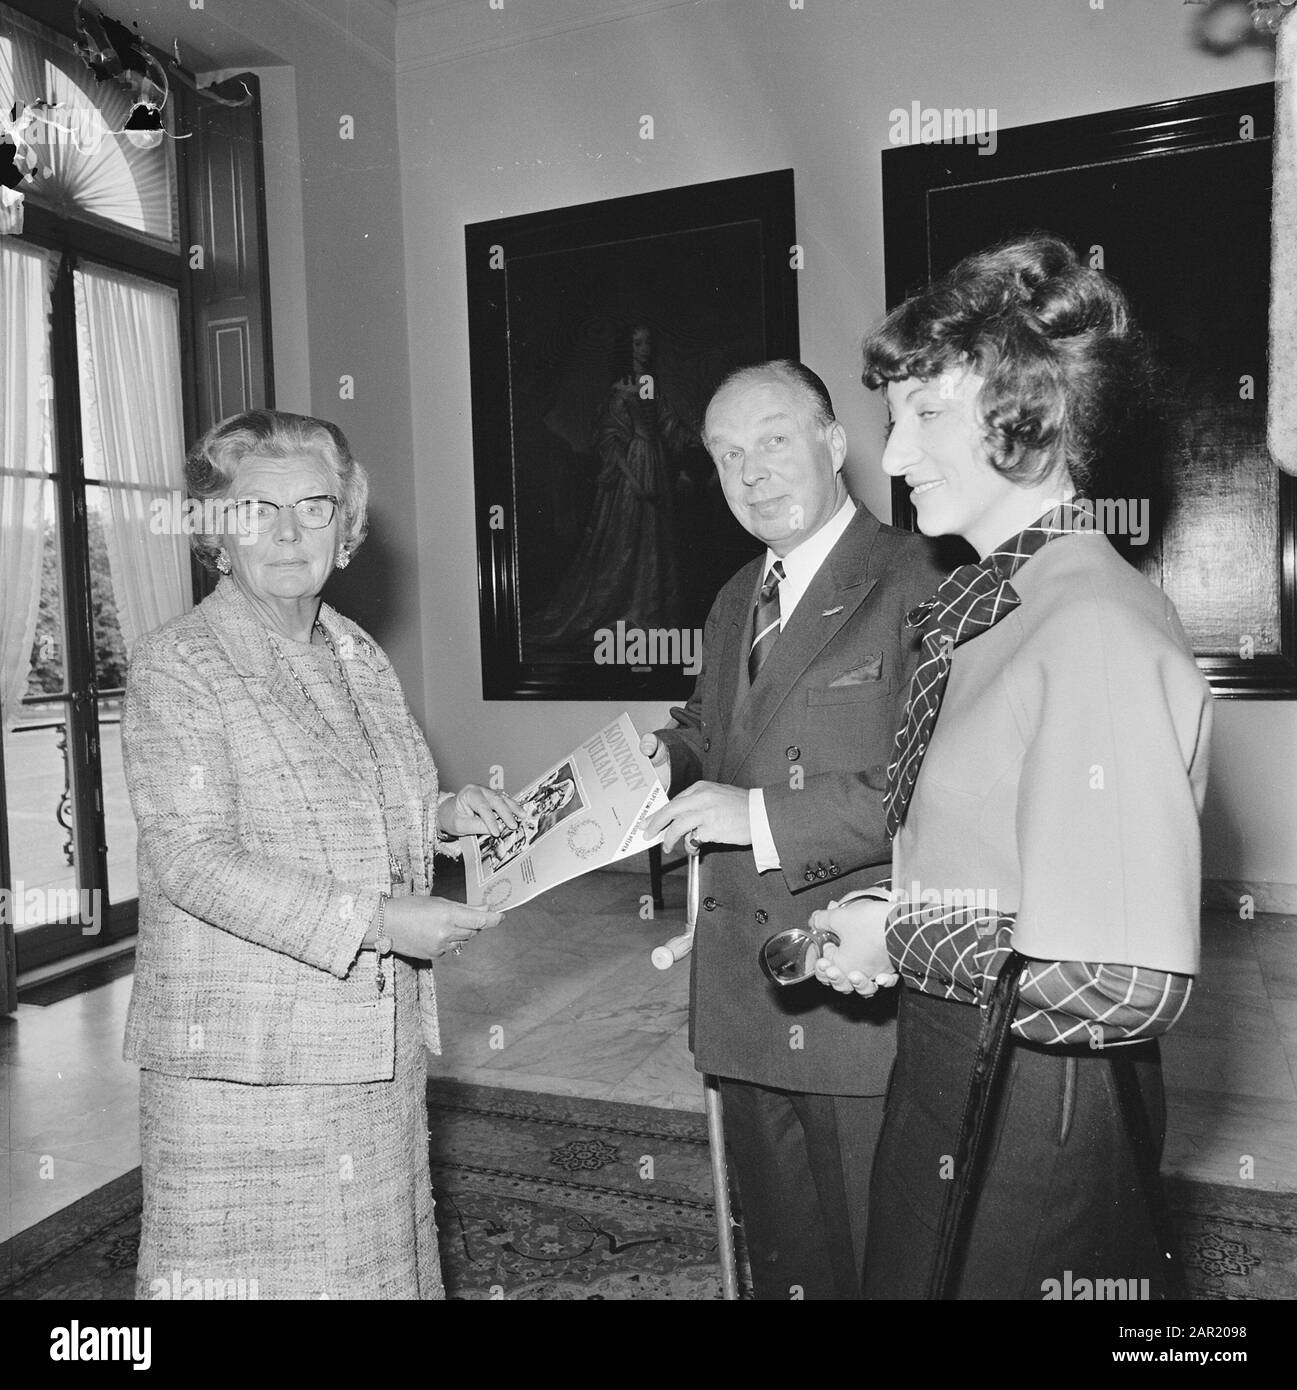 Queen Julia receives first copy Queen Juliana 1925-1965 from G. Krayenhoff. The Queen and Krayenhoff with magazine., Krayenhoff and Mirjam J. Annotation: Queen Juliana received the first copy of the photo magazine Queen Juliana on Thursday at palace Huis ten Bosch. The proceeds of the book are for the work of the Dutch Red Cross. The president of the Red Cross, Jr. G. Krayenhoff offered the book. Dutch daily newspaper: reformed family magazine/headred. P. Youngster... [et al.]. Amersfoort, 15-09-1973. Seen on Delpher on 19-05-2017, resolver.kb.nl/ resolve?urn=ddd:010633186:mpeg21:a0105 Date: S Stock Photo